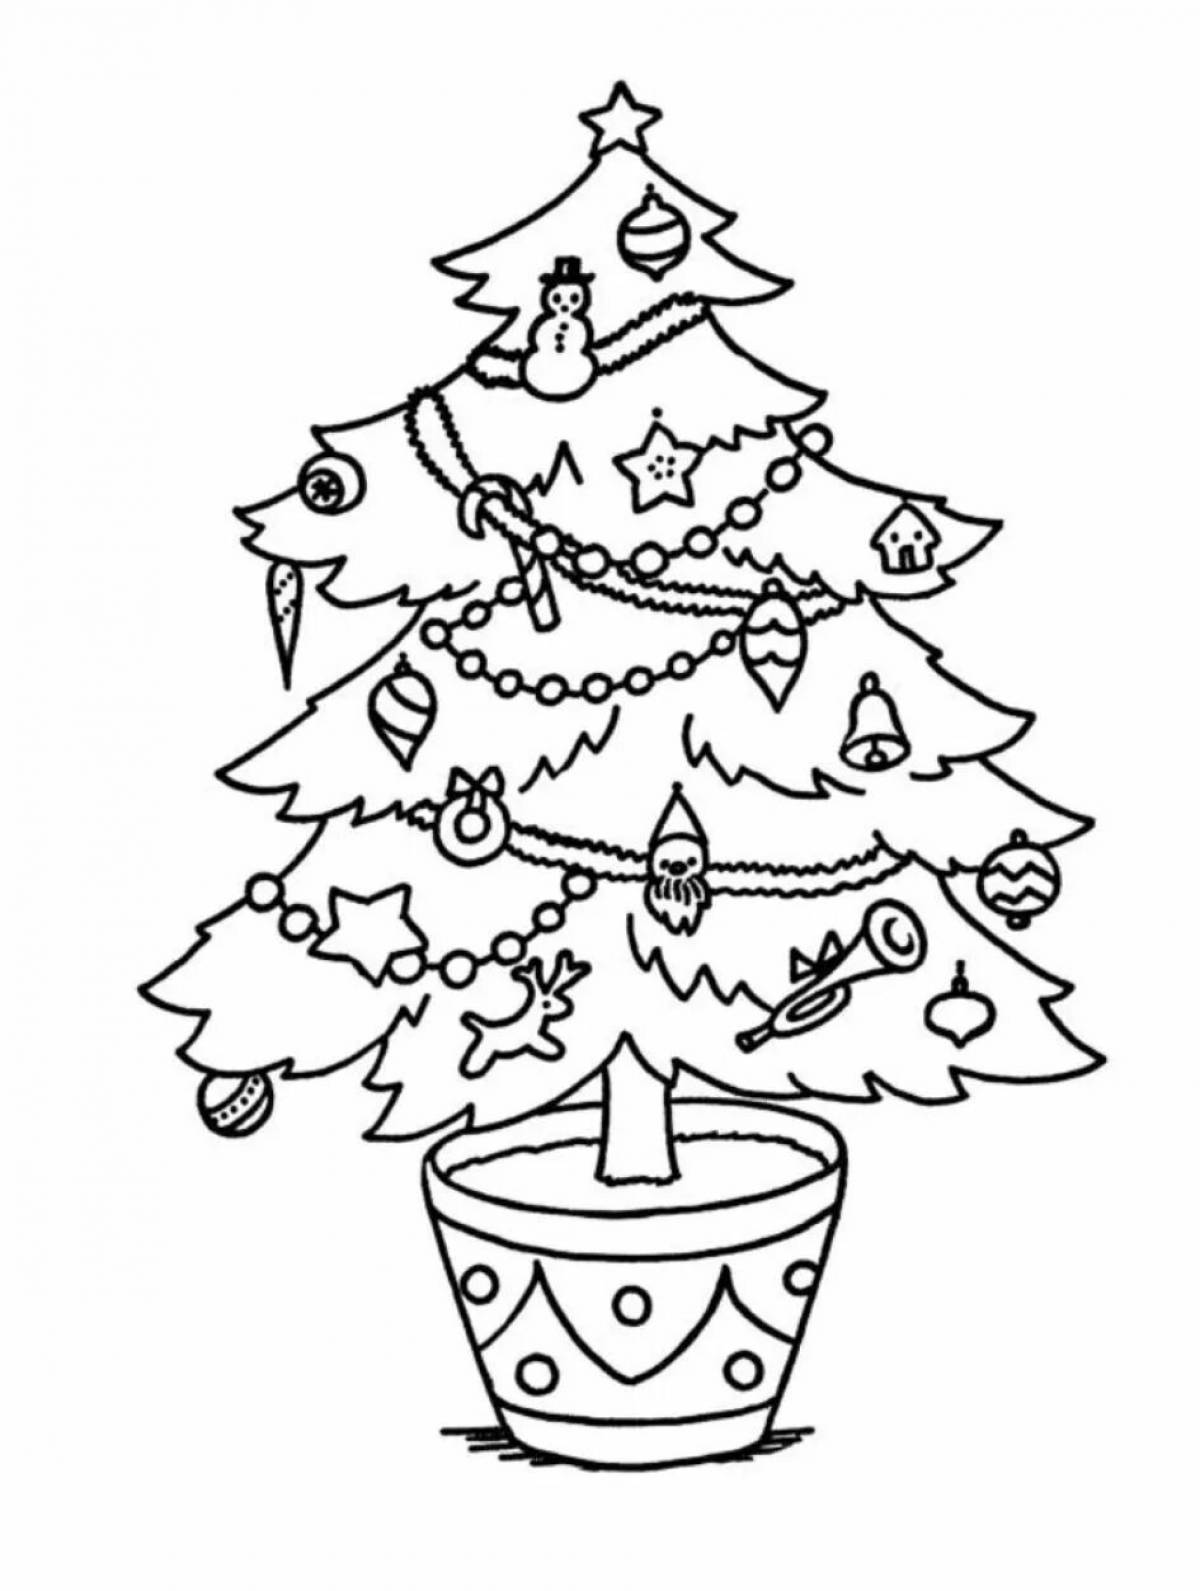 Colourful Christmas tree coloring page